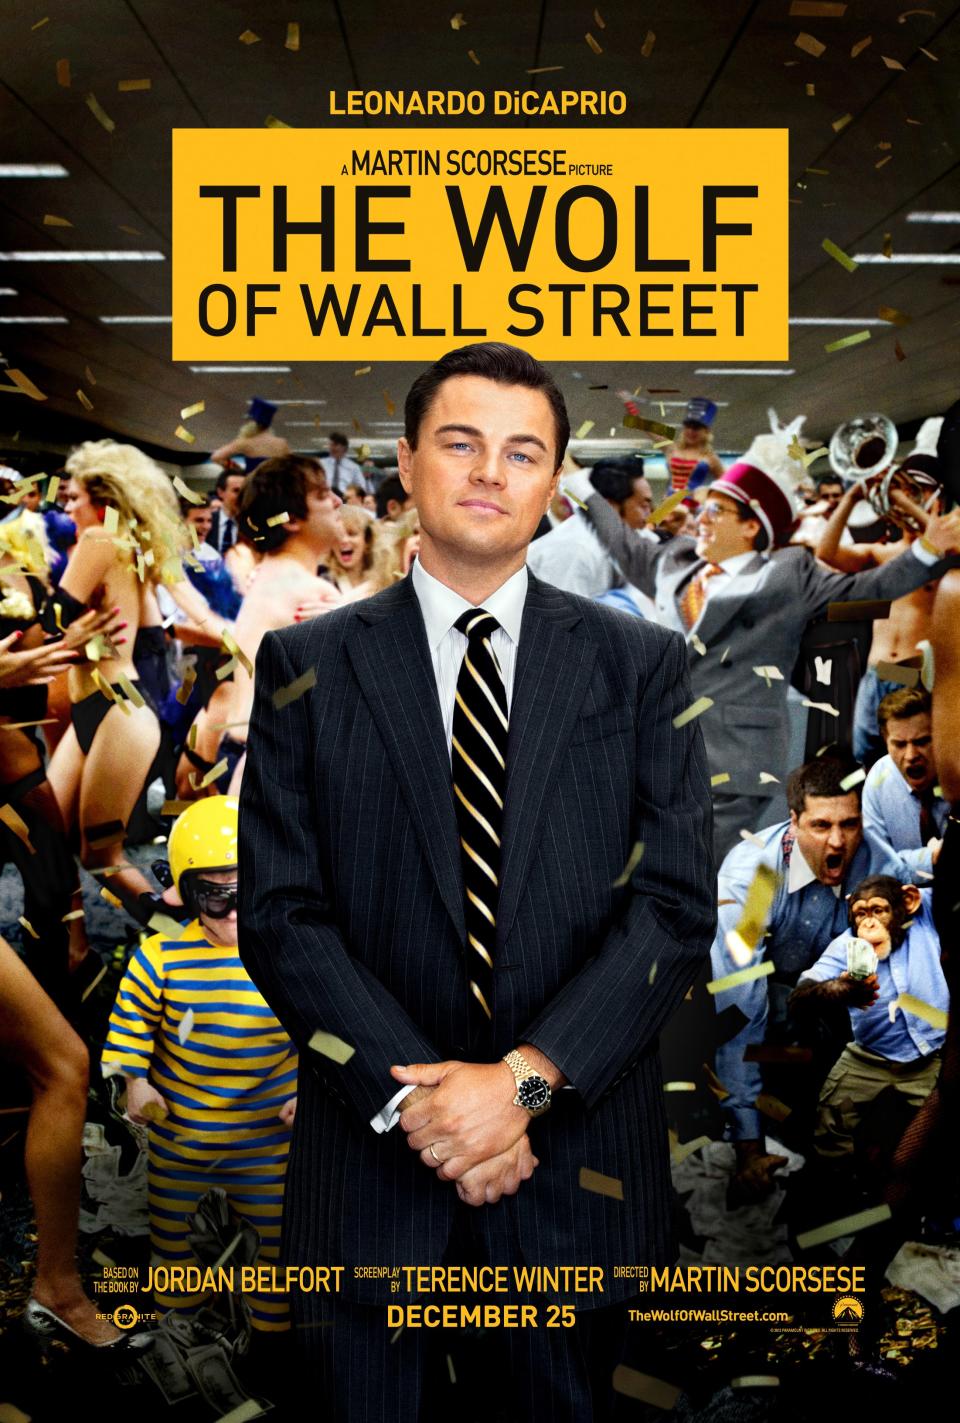 THE WOLF OF WALL STREET, US poster art, Leonardo DiCaprio, 2013. ©Paramount Pictures/courtesy Everett Collection